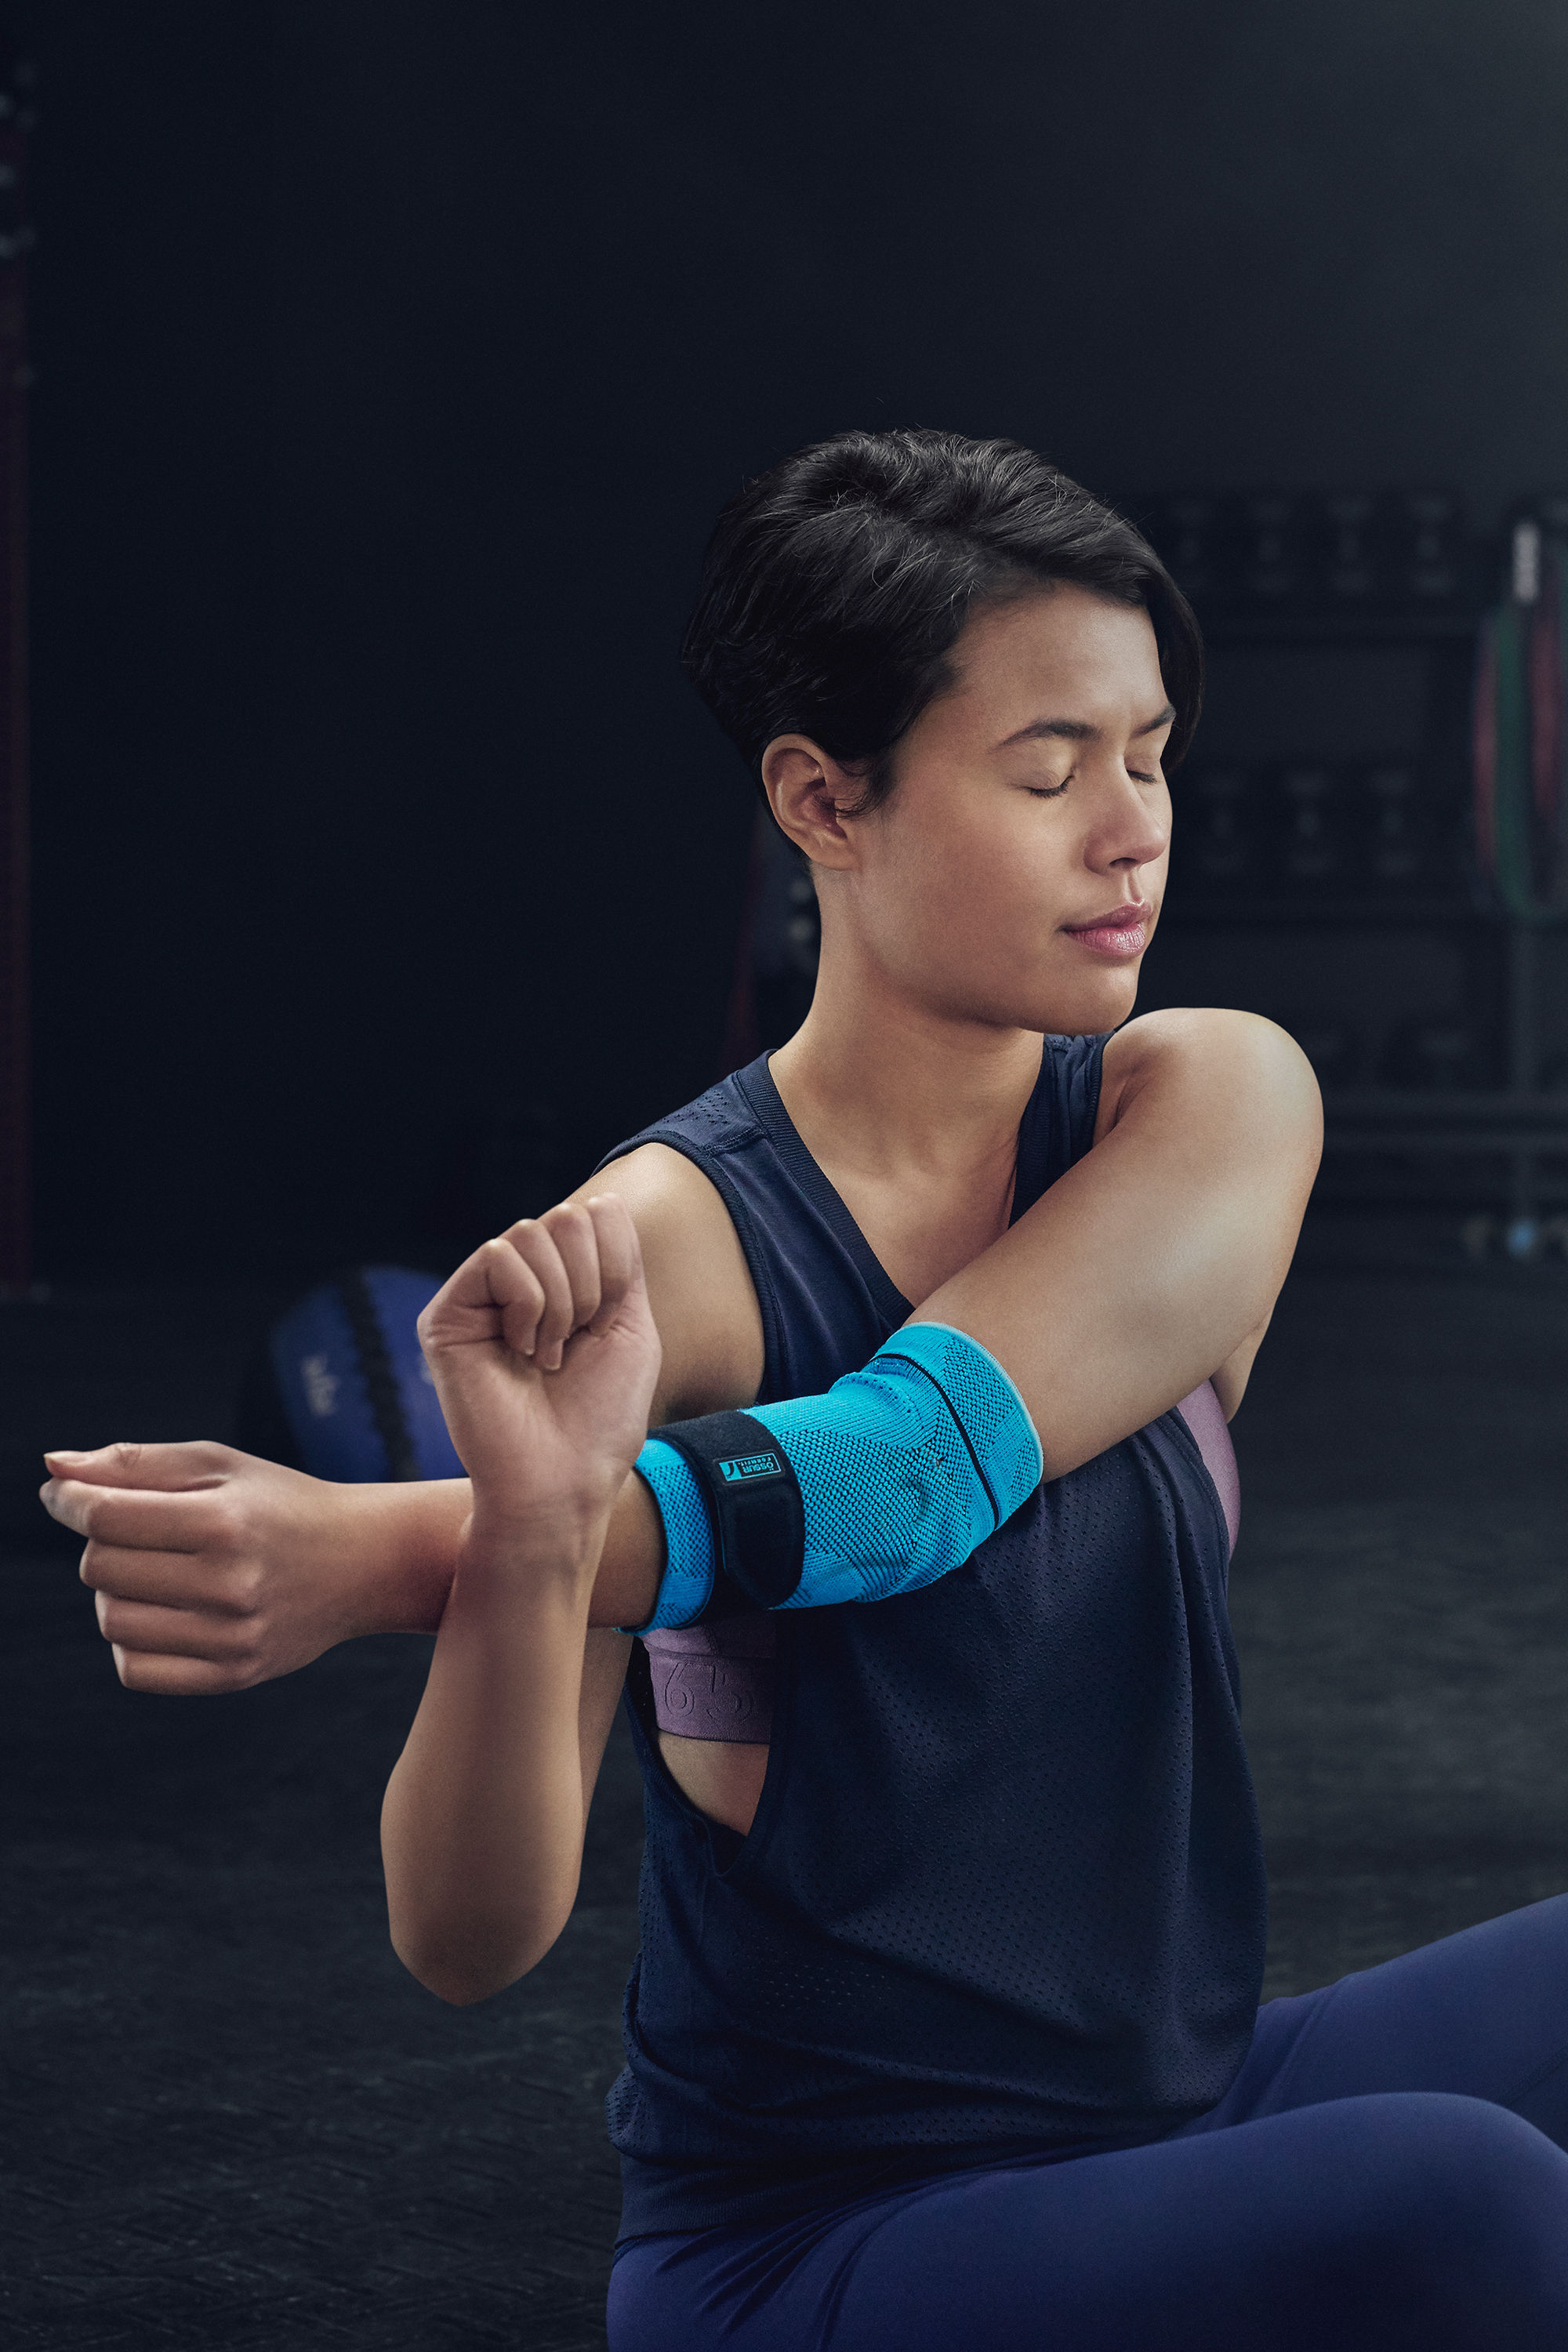 Formfit® Braces—Ultimate in Breathable Support Technology.